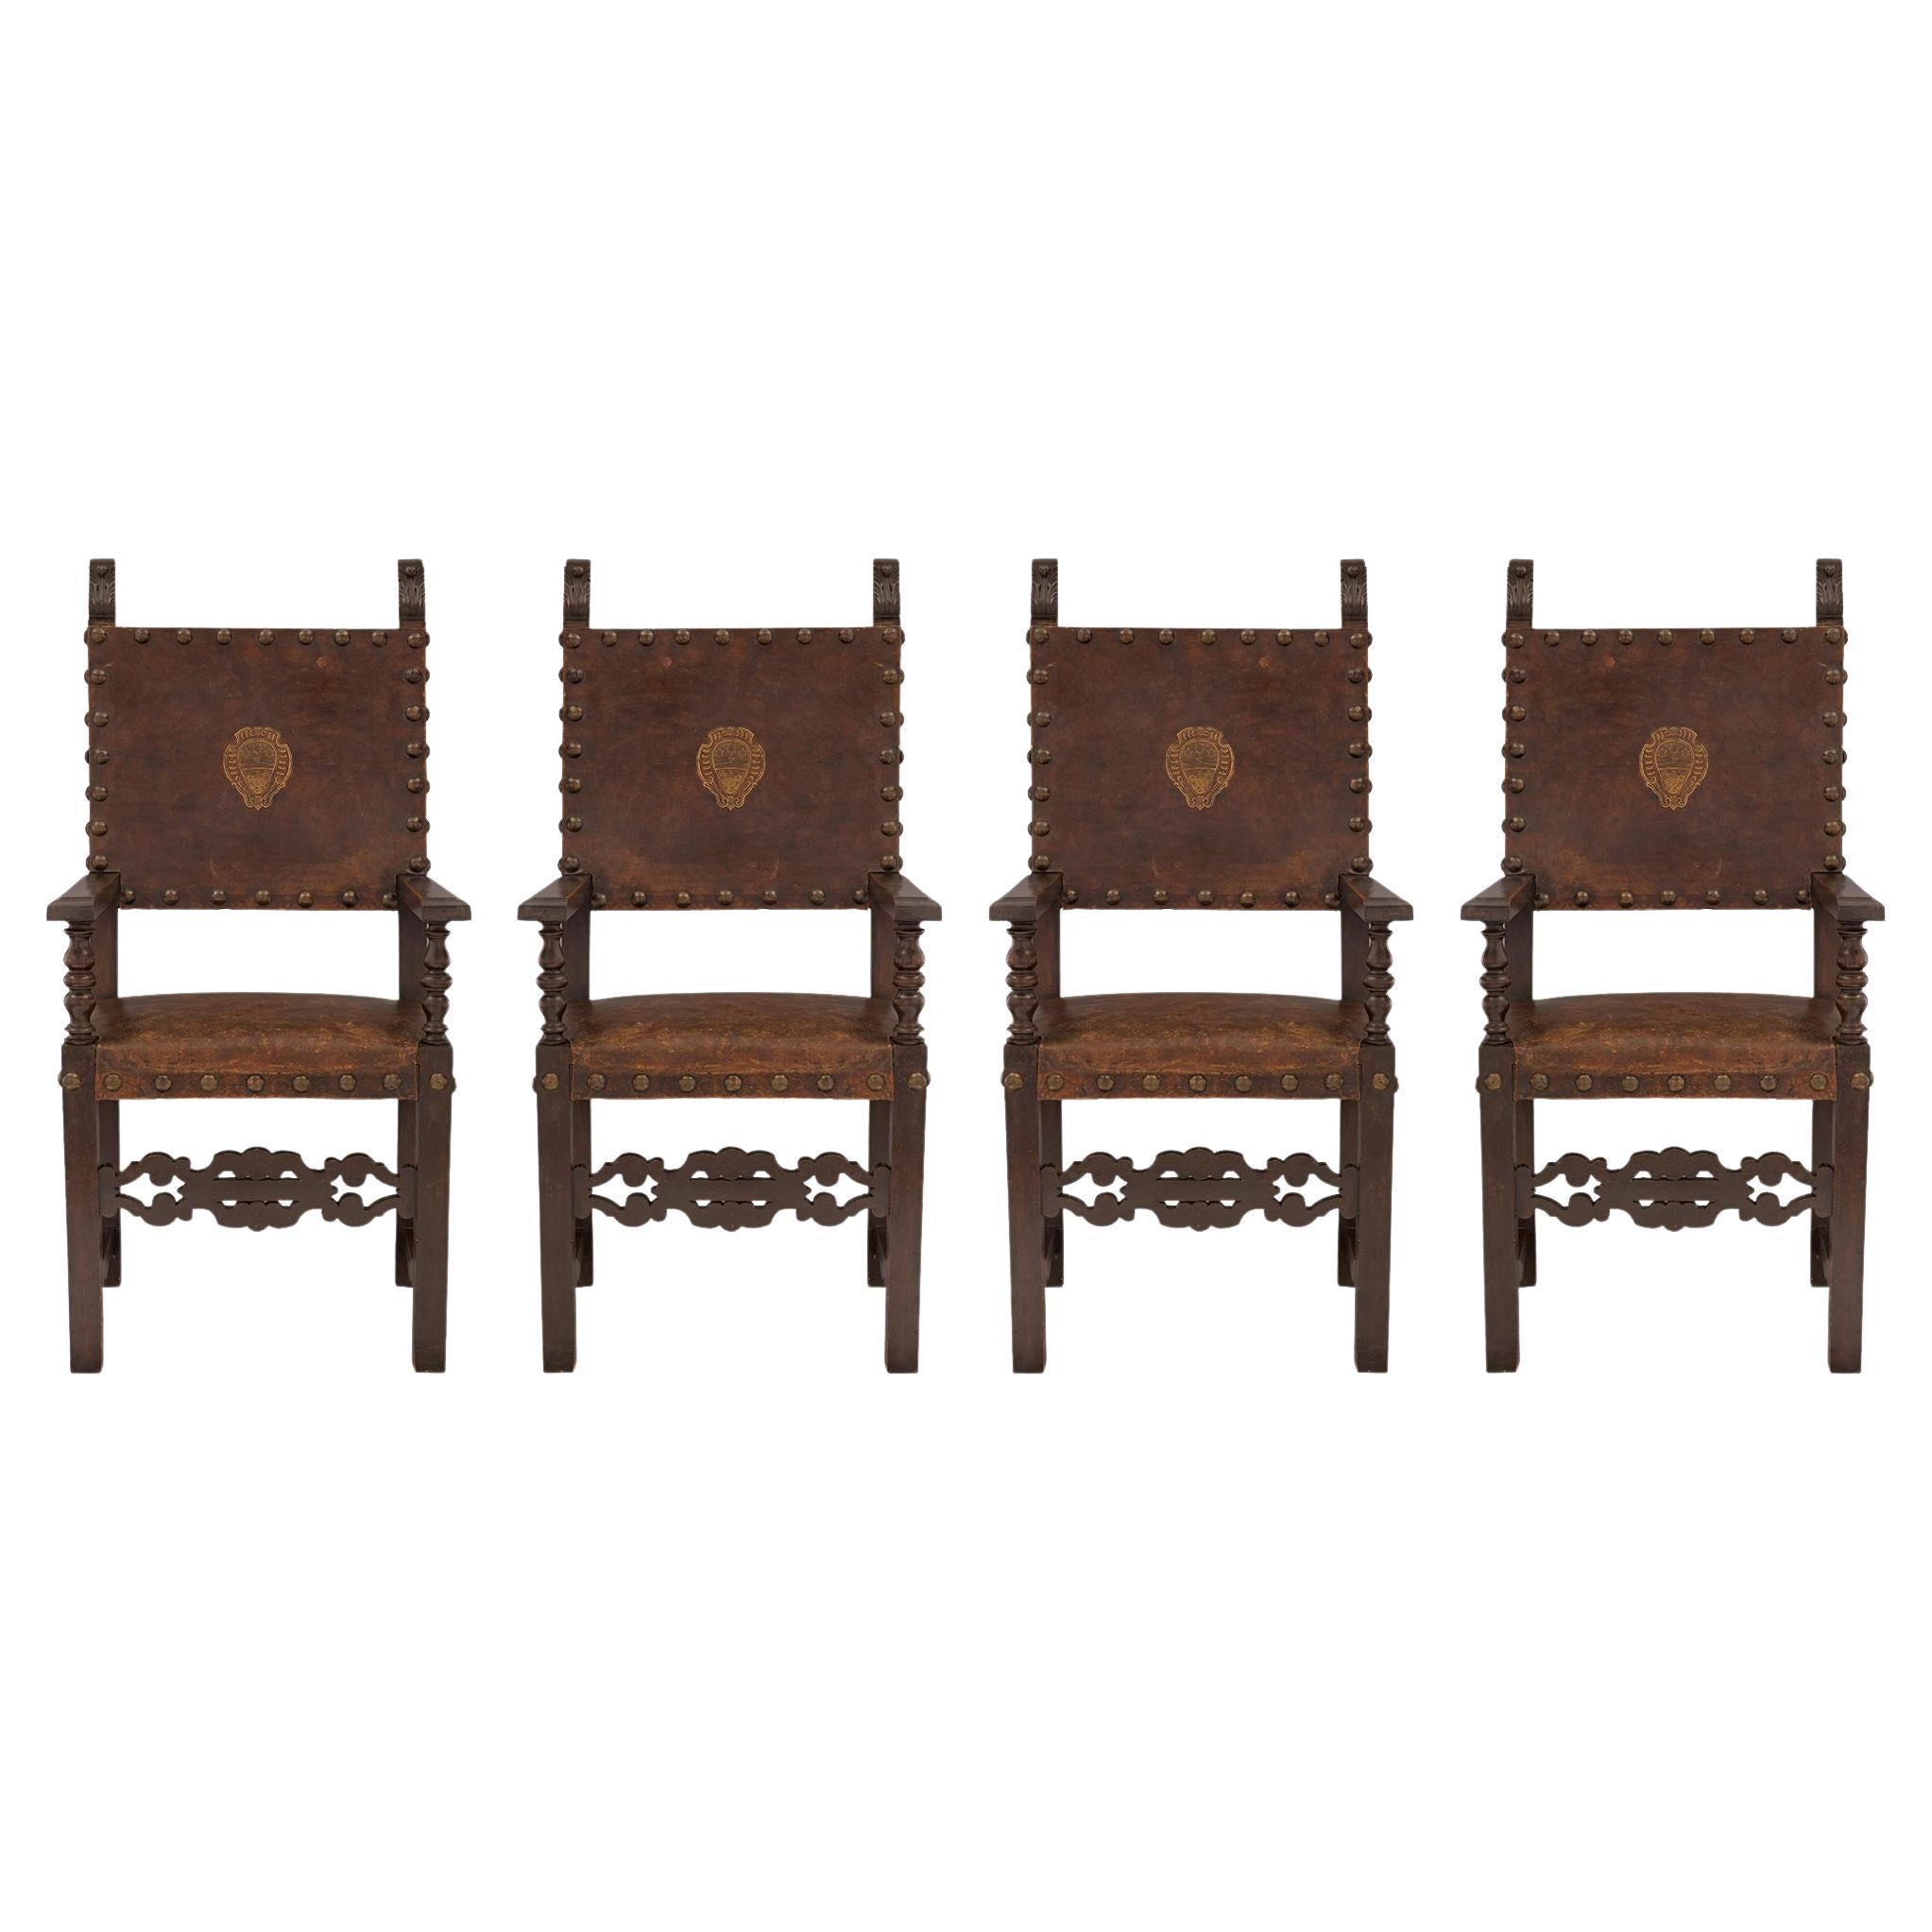 Set of Four Italian Early 19th Century Walnut and Leather Throne Chairs